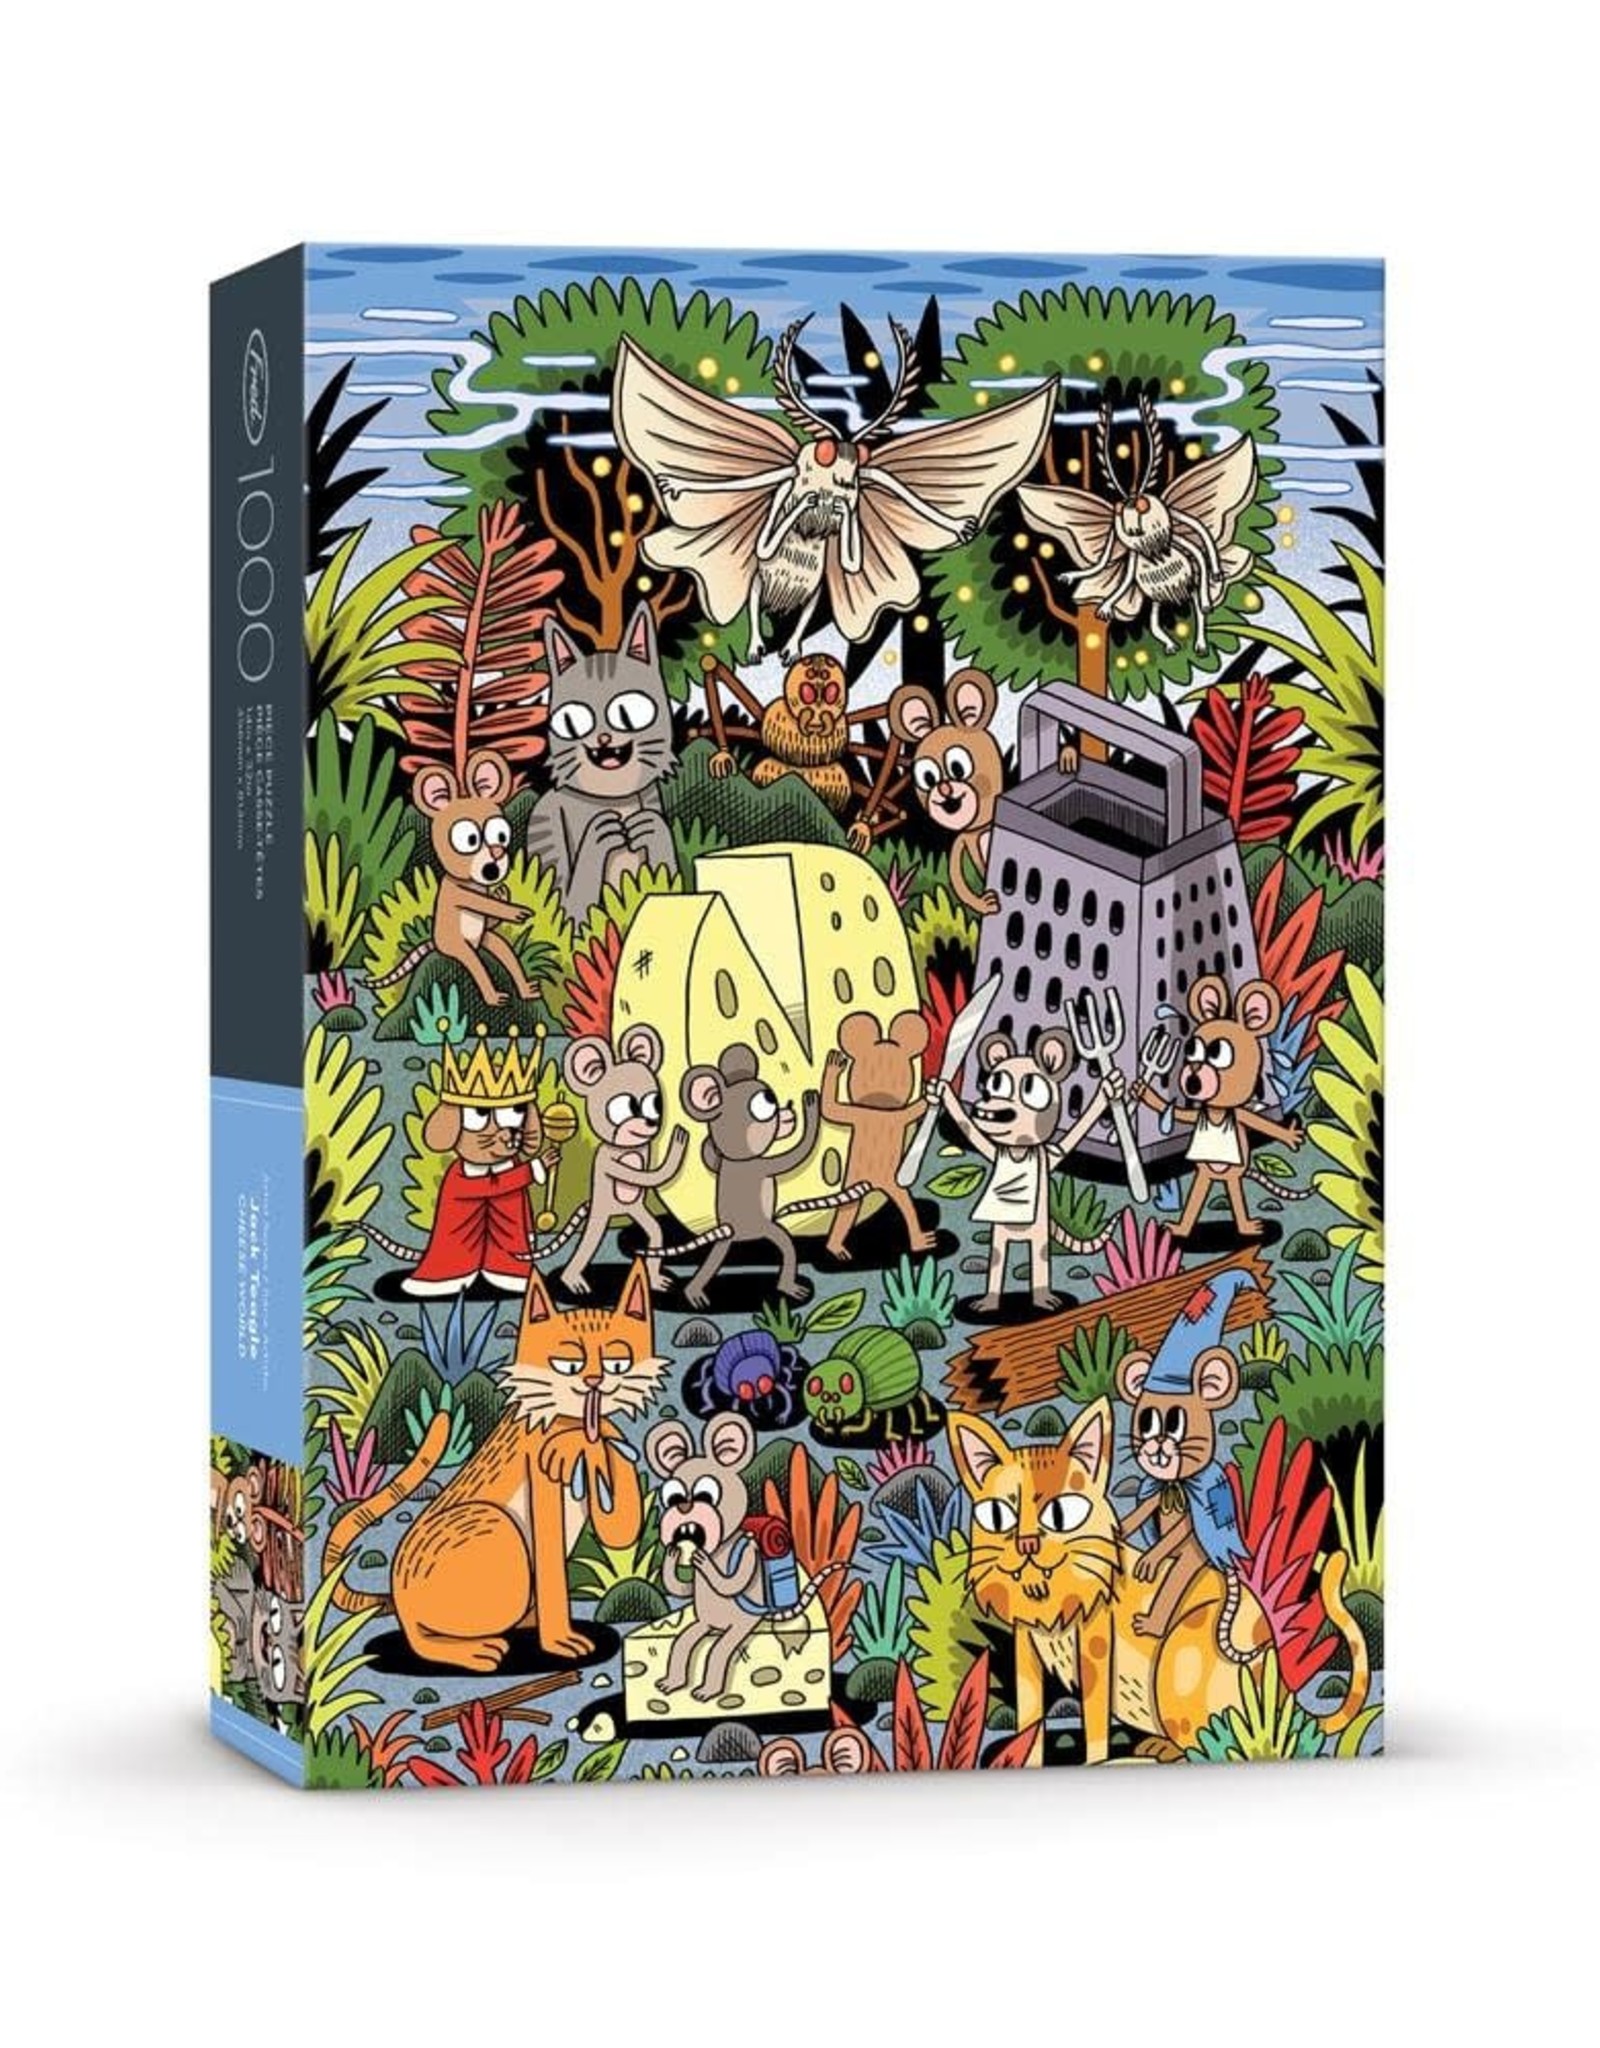 Fred & Friends FRED PUZZLE 1000 PC - CHEESE WORLD